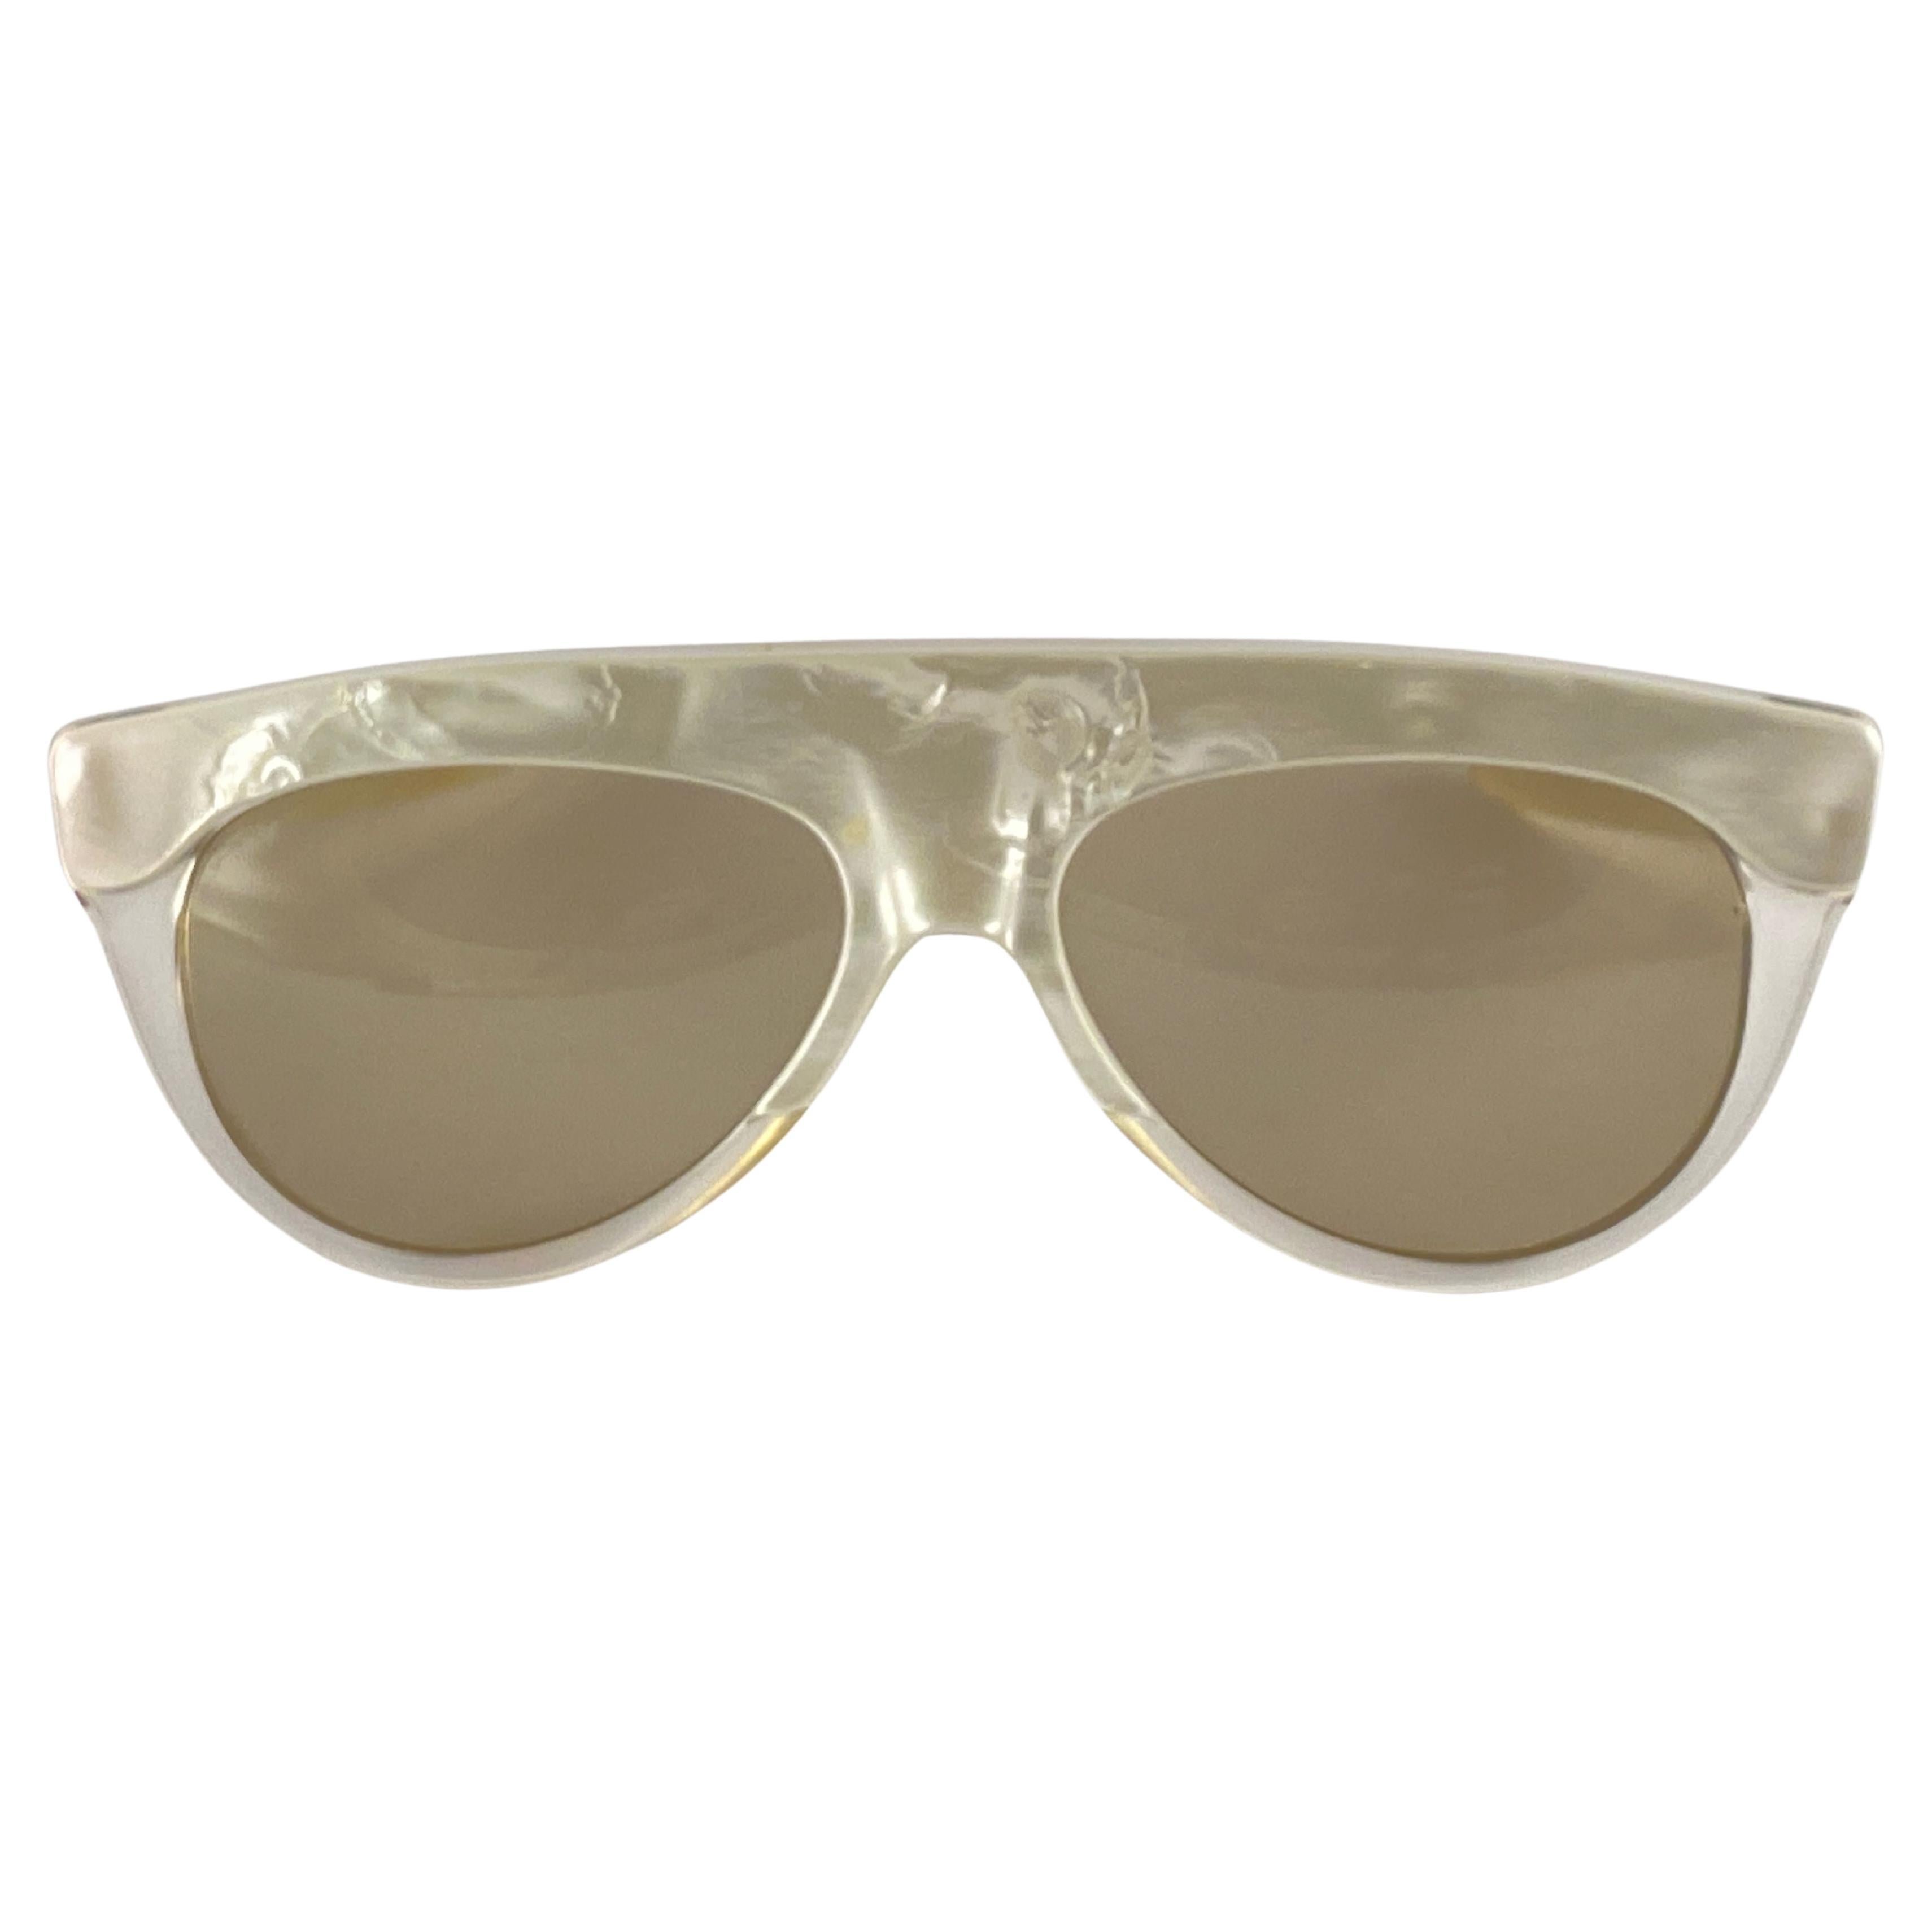 Vintage Thierry Mugler " Hemis " Mask Mother of Pearl France Sunglasses 1977 For Sale